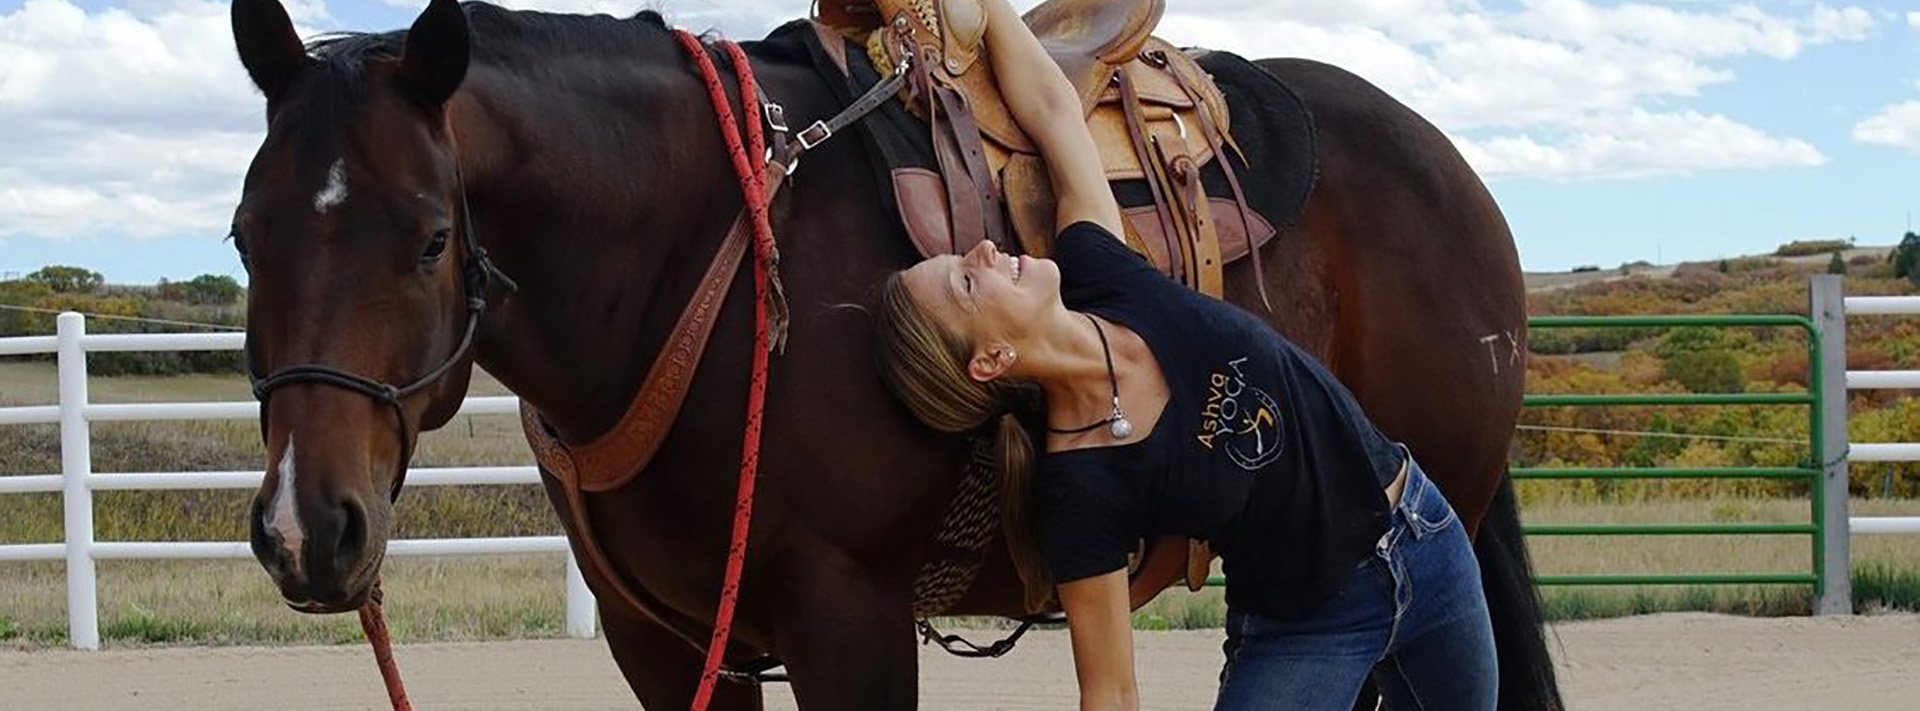 5 Essential Yoga Stretches for Horse Riders - Horse Rookie